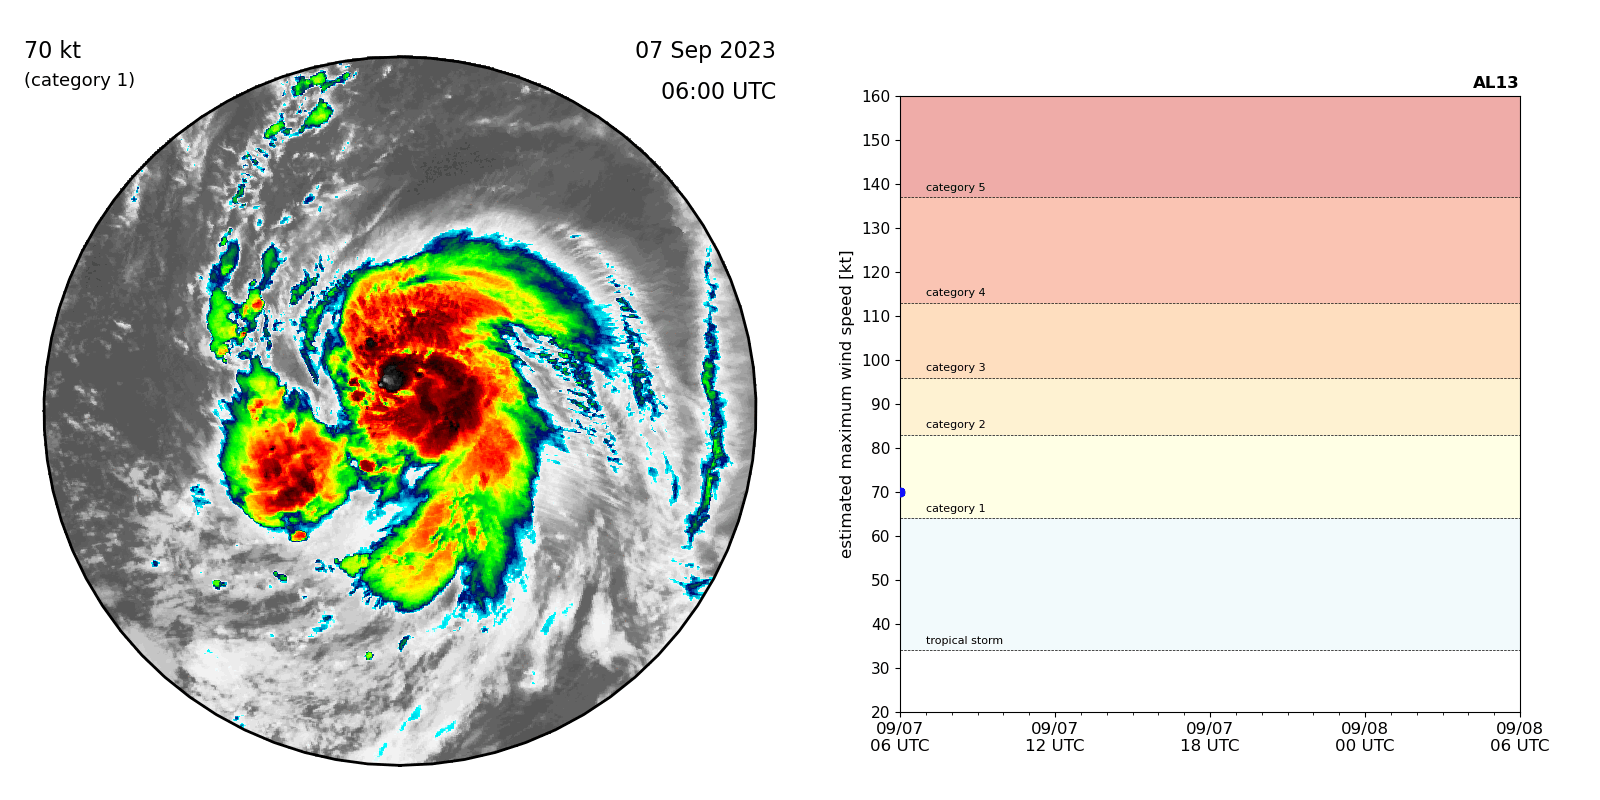 Hurricane Lee (left) underwent rapid intensification, strengthening from a Category 1 storm (yellow in the chart at right) to a Category 5 storm (red).